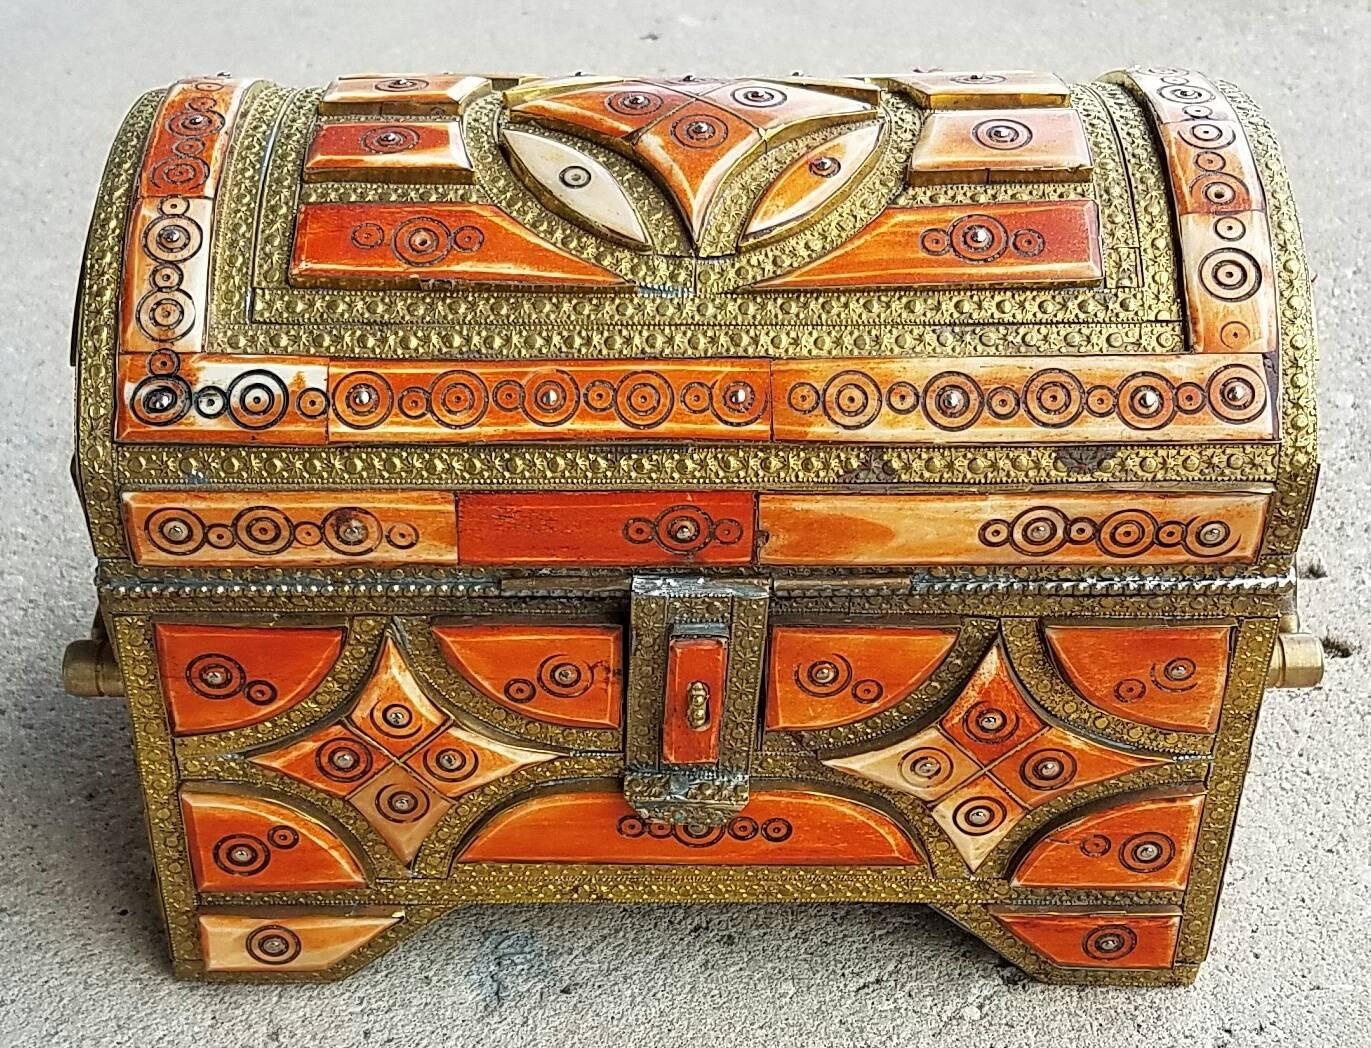 A beautiful Moroccan camel bone trunk from Marrakech. Camel bone dyed in henna mixed with metal inlaid makes this trunk a great addition to any decor. Measuring approximately 10